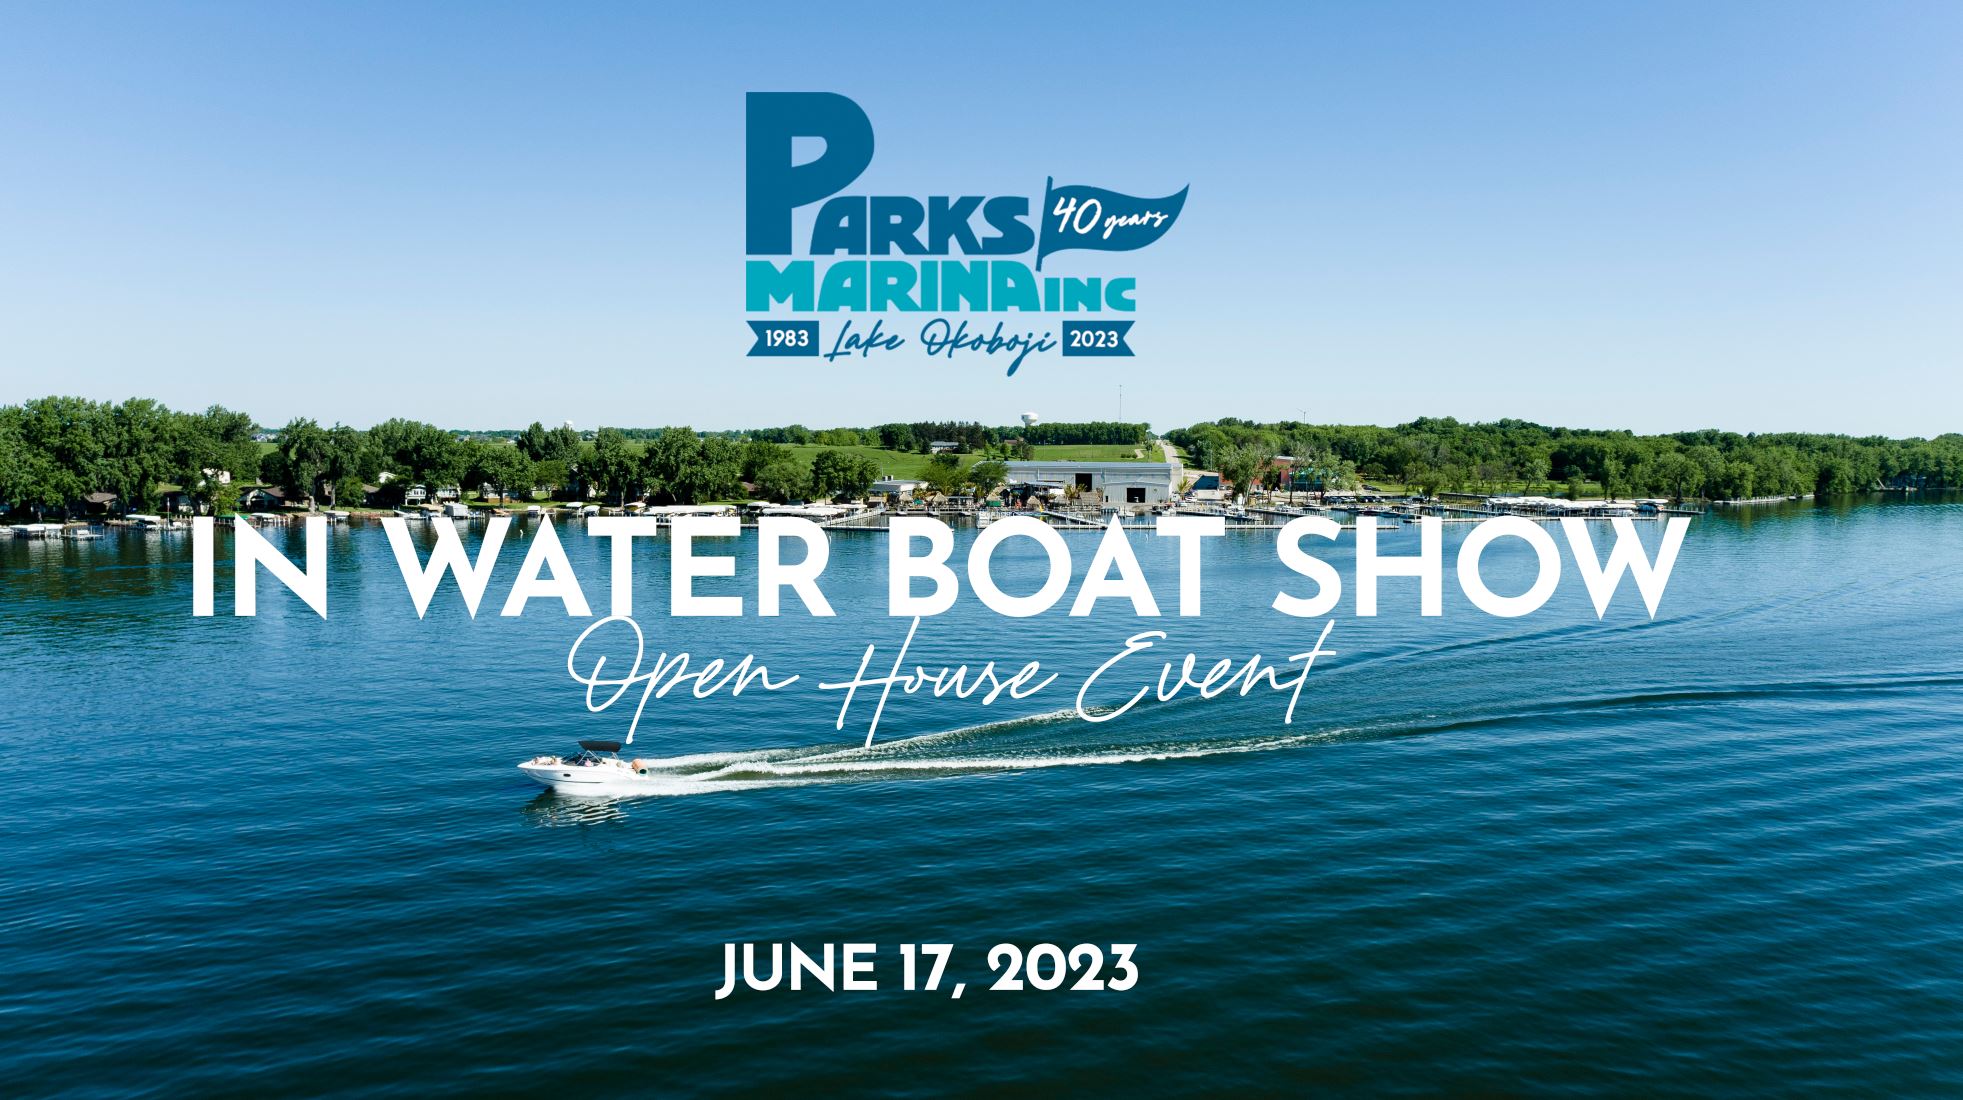 Parks Marina In Water Boat Show - Open House Event